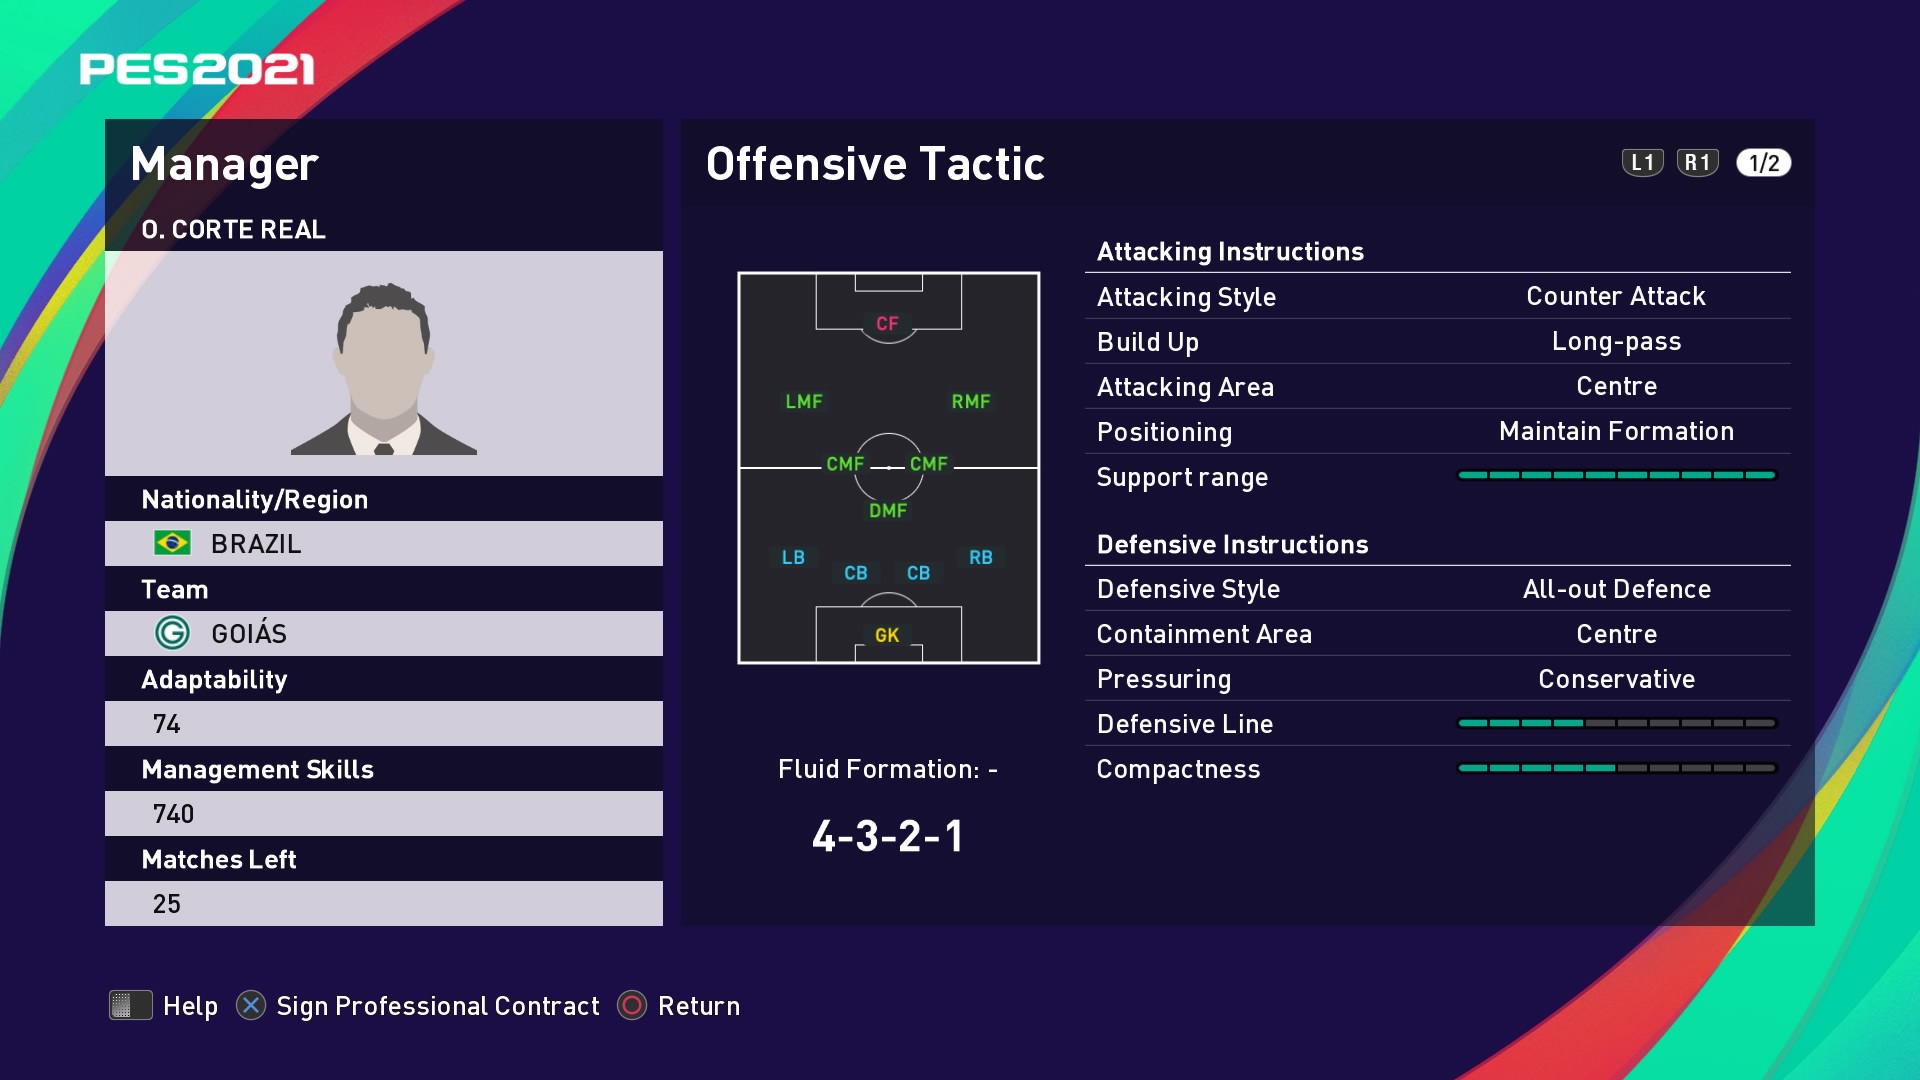 O. Corte Real (Thiago Larghi) Offensive Tactic in PES 2021 myClub